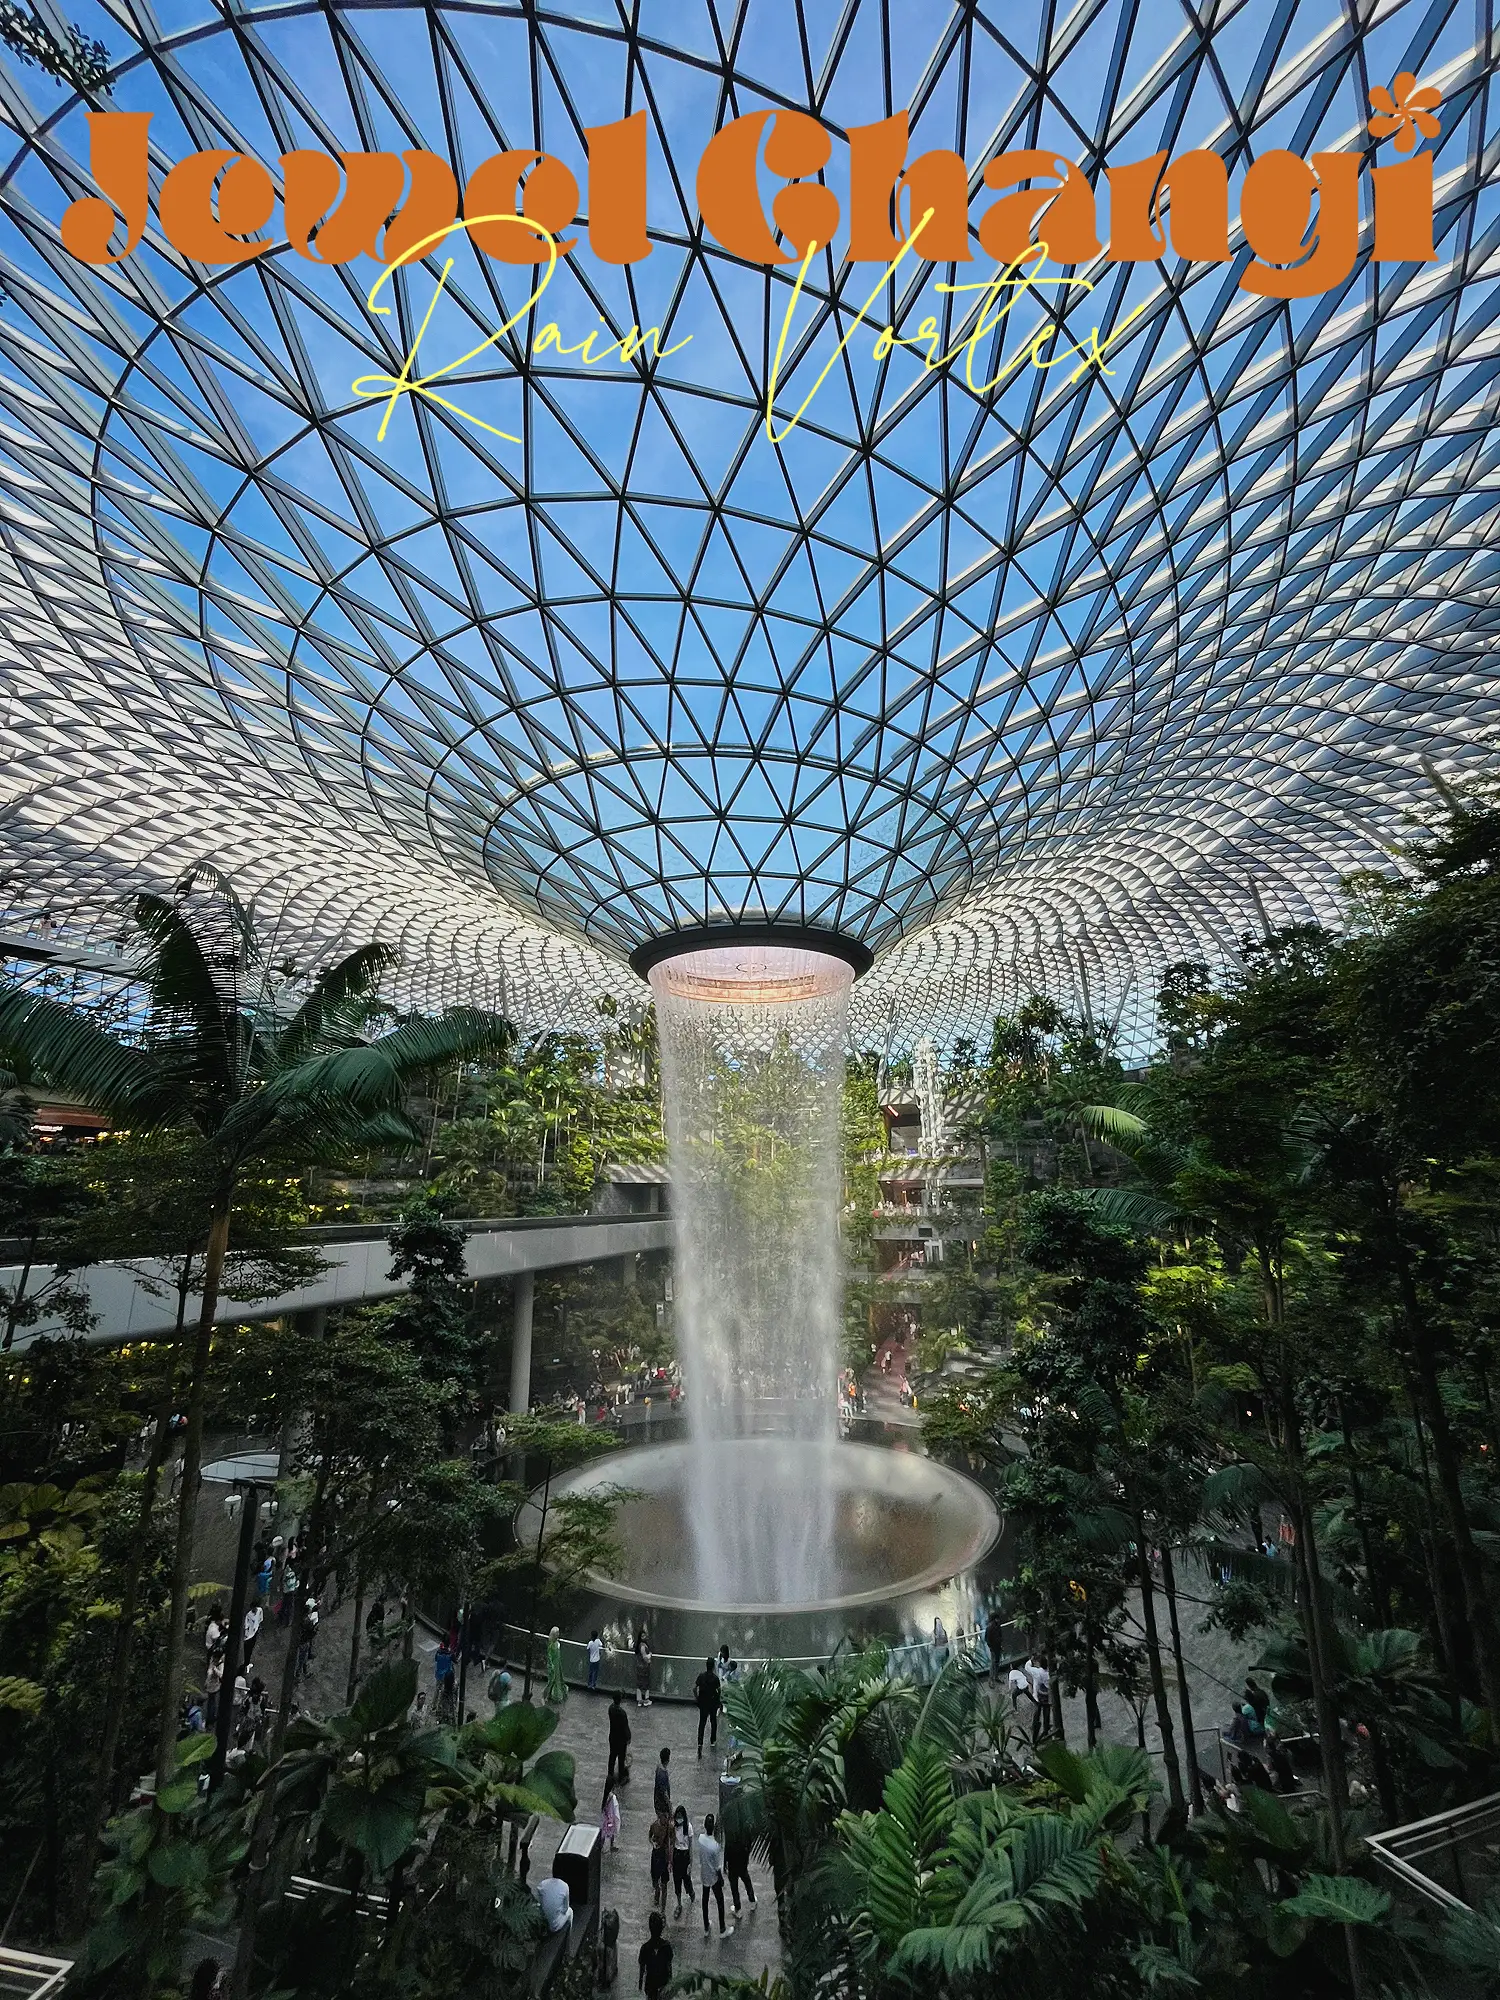 How to Visit the Singapore Jewel Waterfall on an Airport Layover